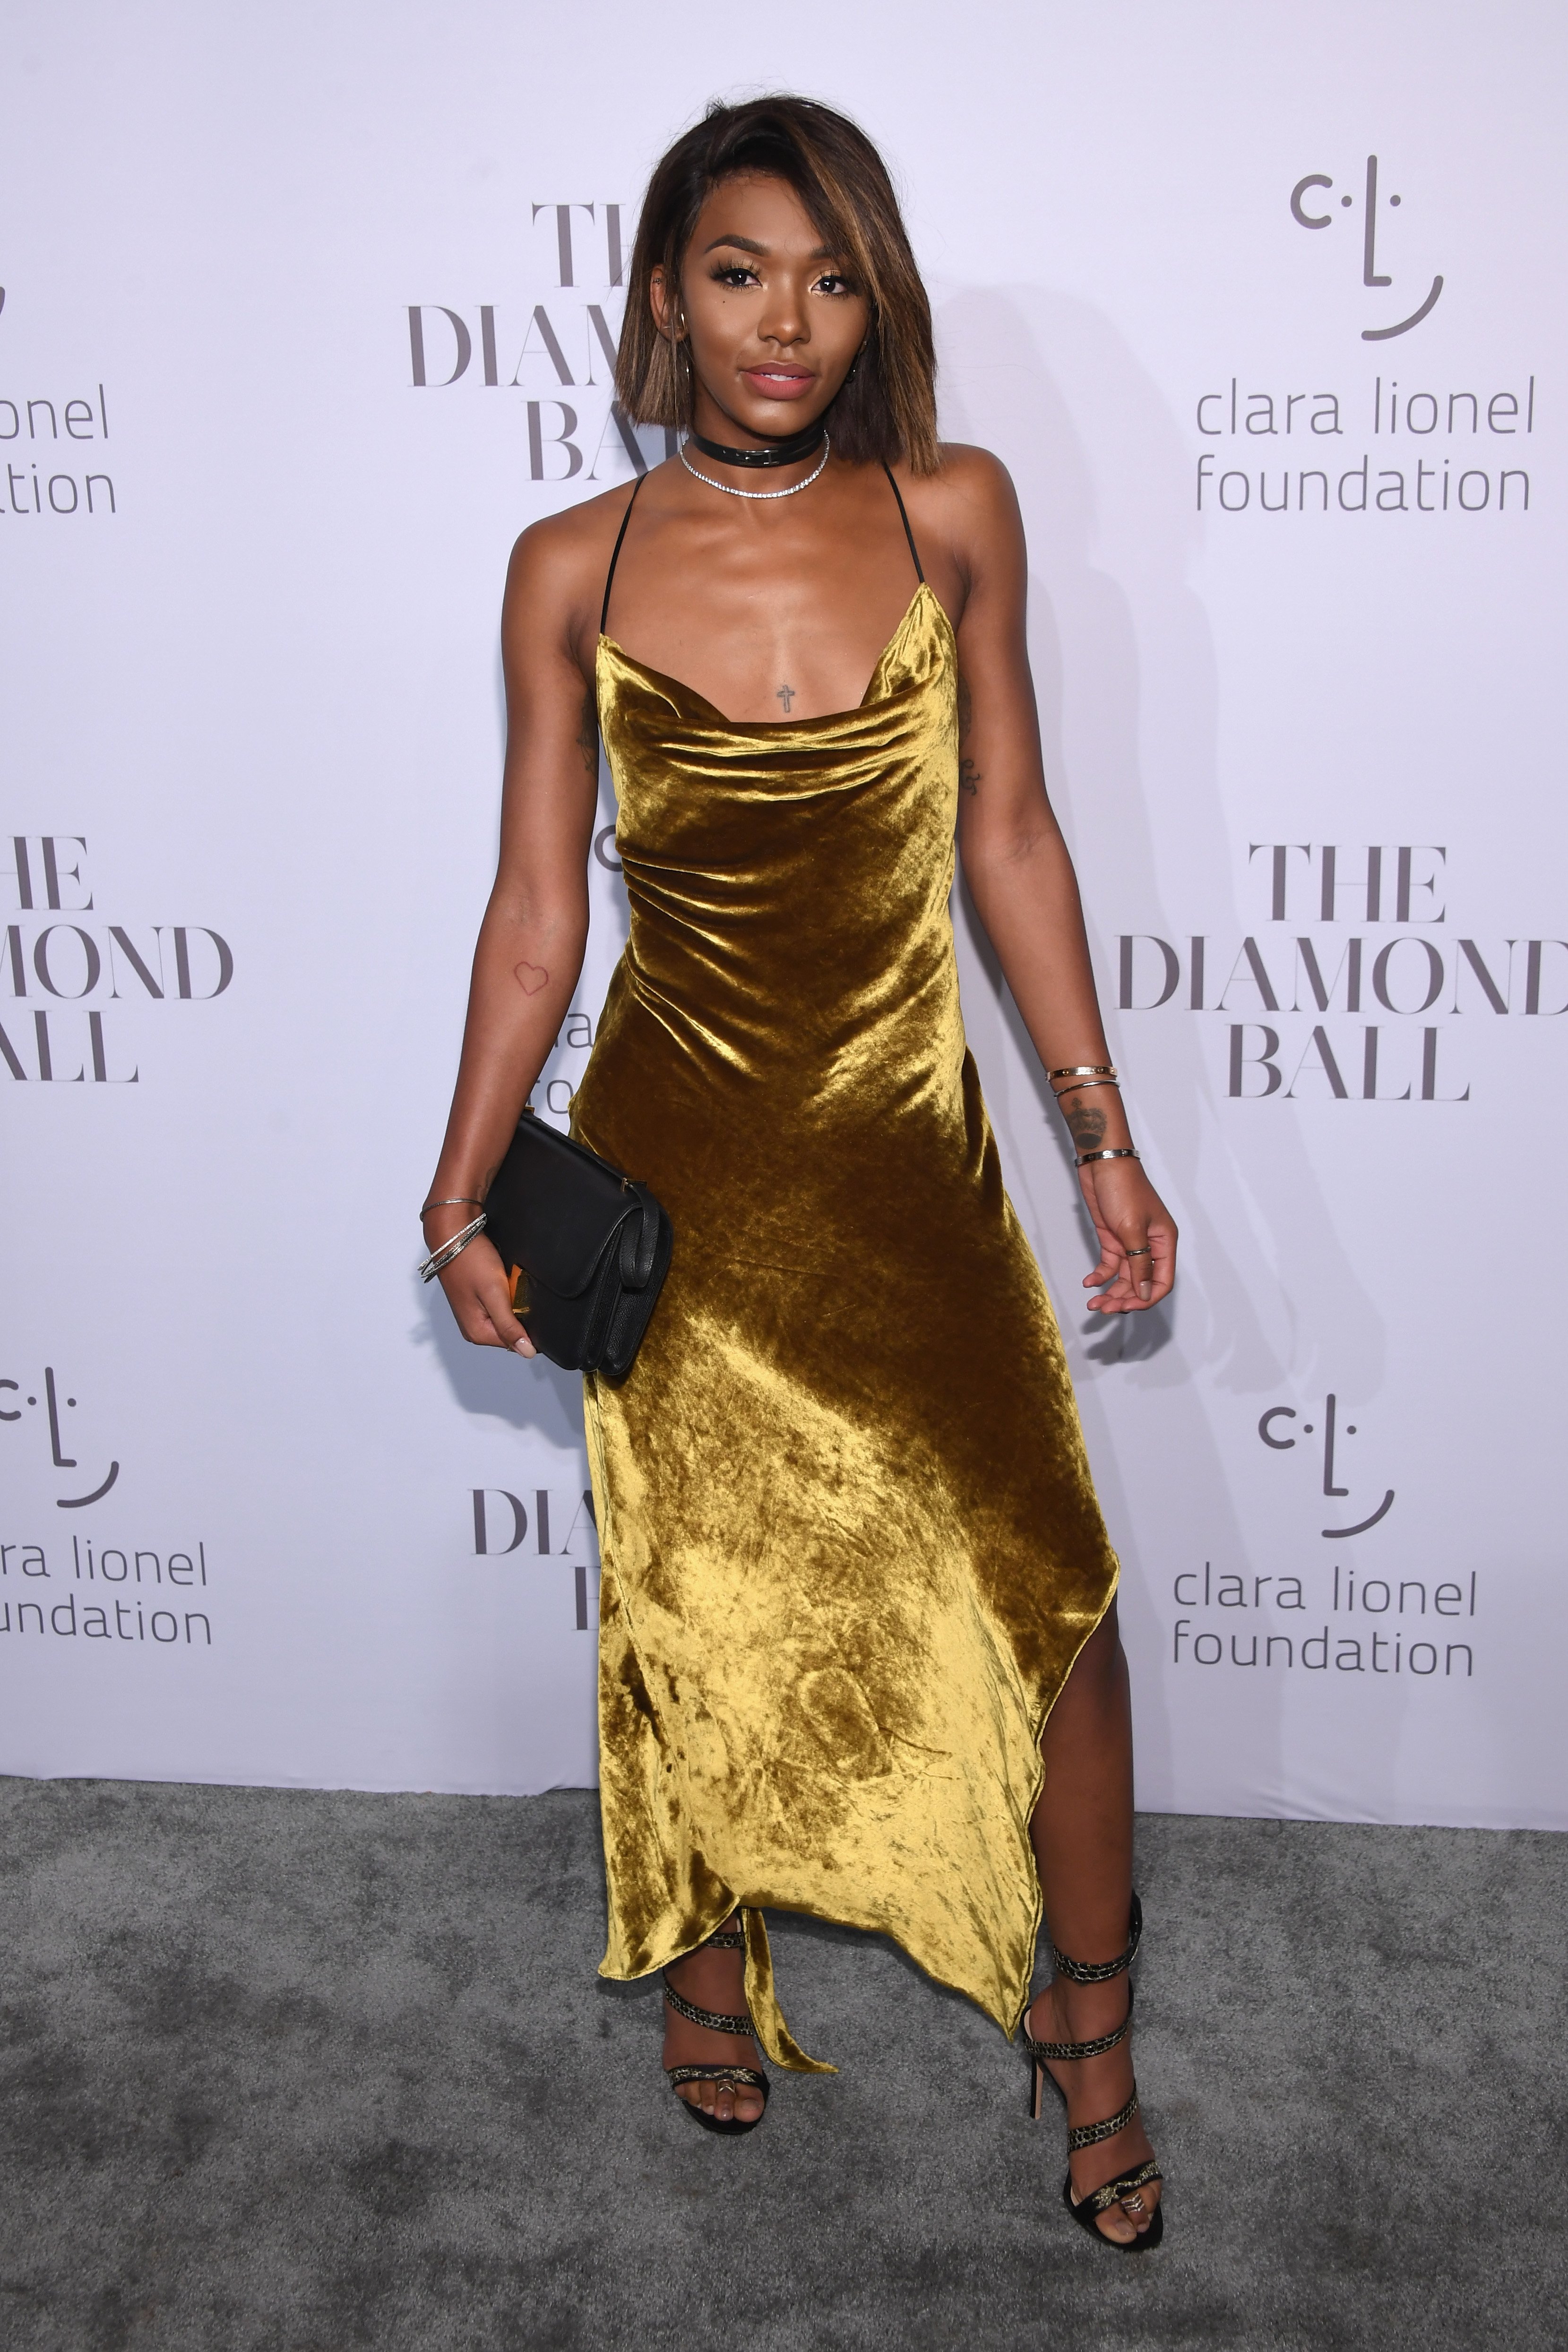 Elisa Johnson attends Rihanna's 3rd Annual Diamond Ball at Cipriani Wall Street on September 14, 2017, in New York City. | Source: Getty Images